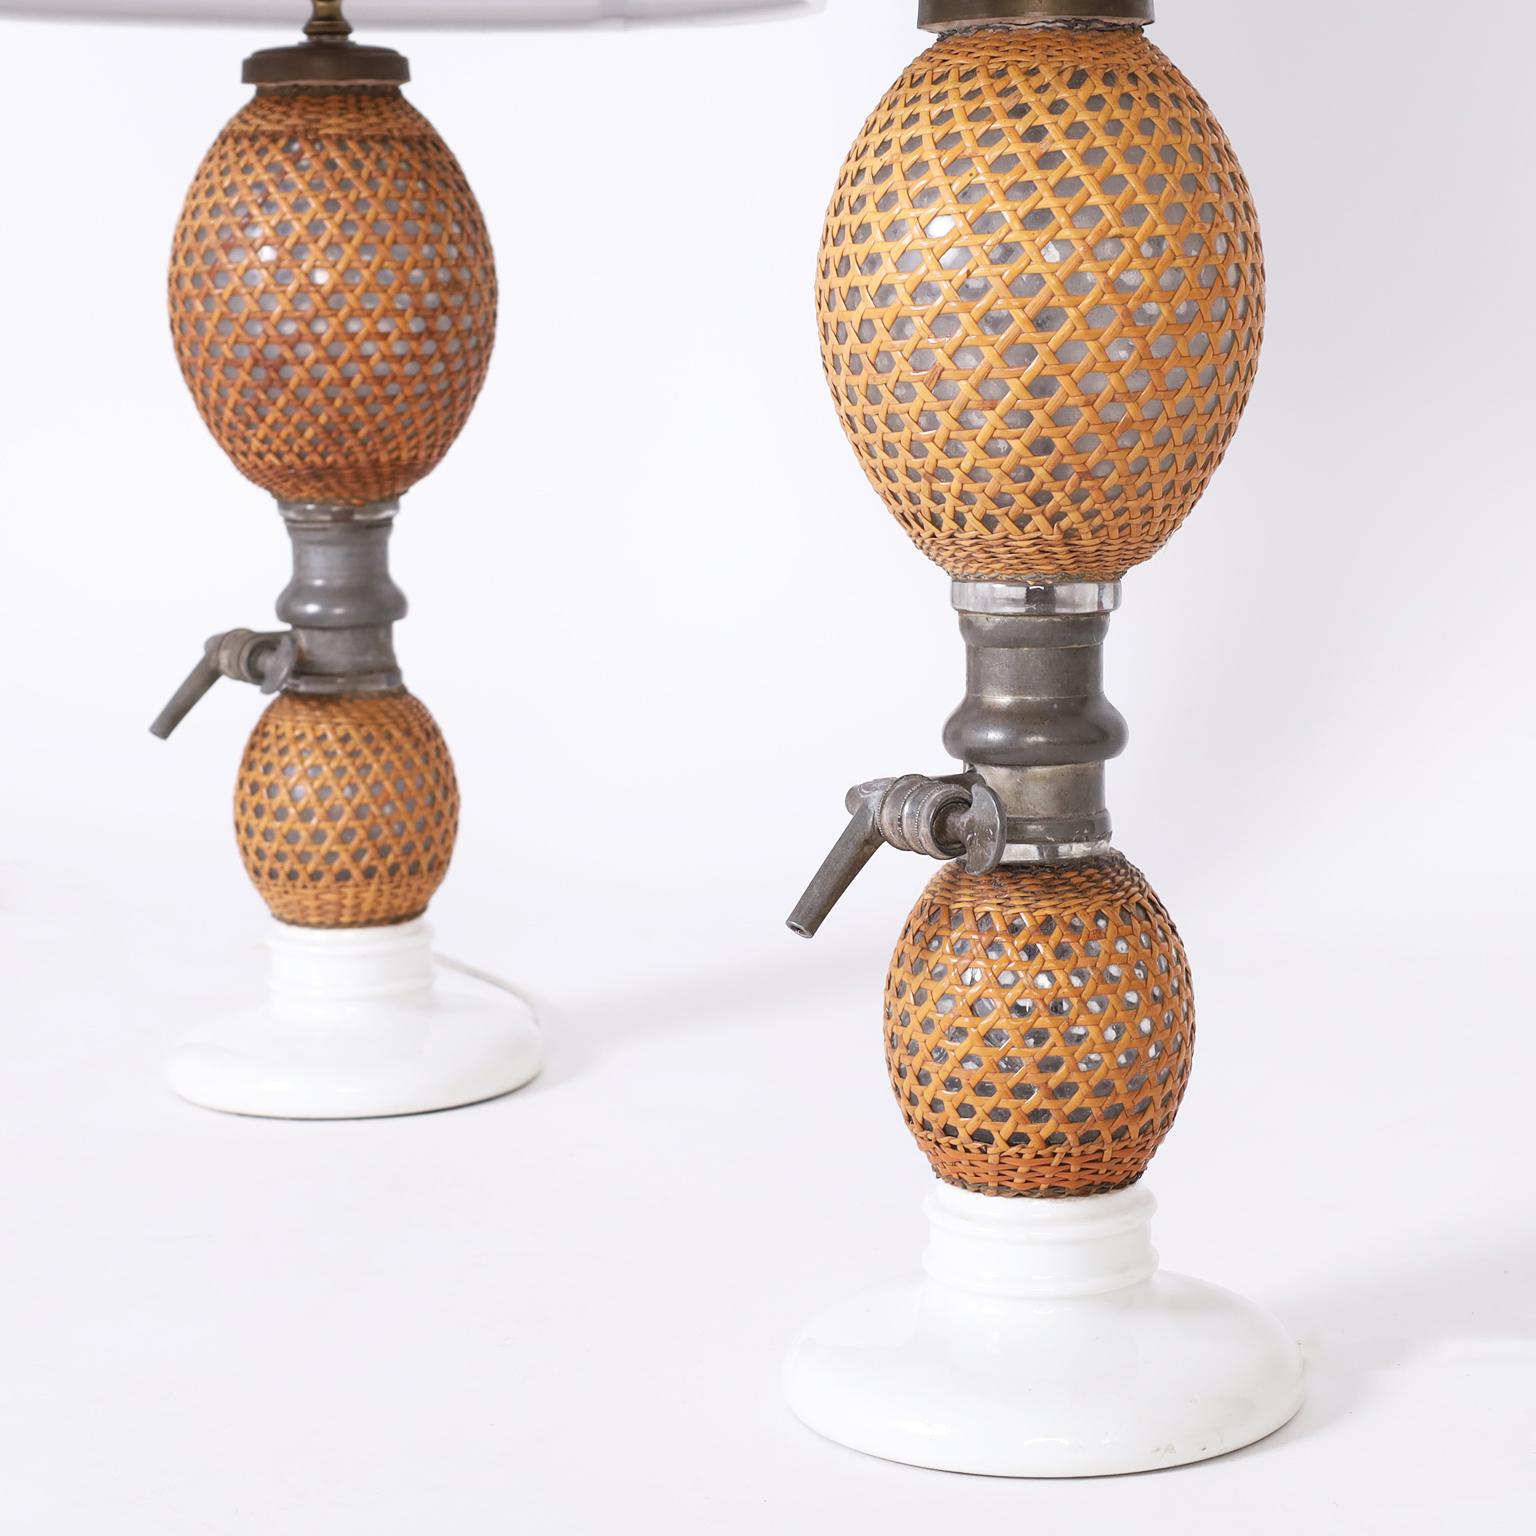 Antique French seltzer bottles now table lamps with double glass bulbs wrapped with wicker, pewter spout and valve mechanism, and glazed white porcelain bases.